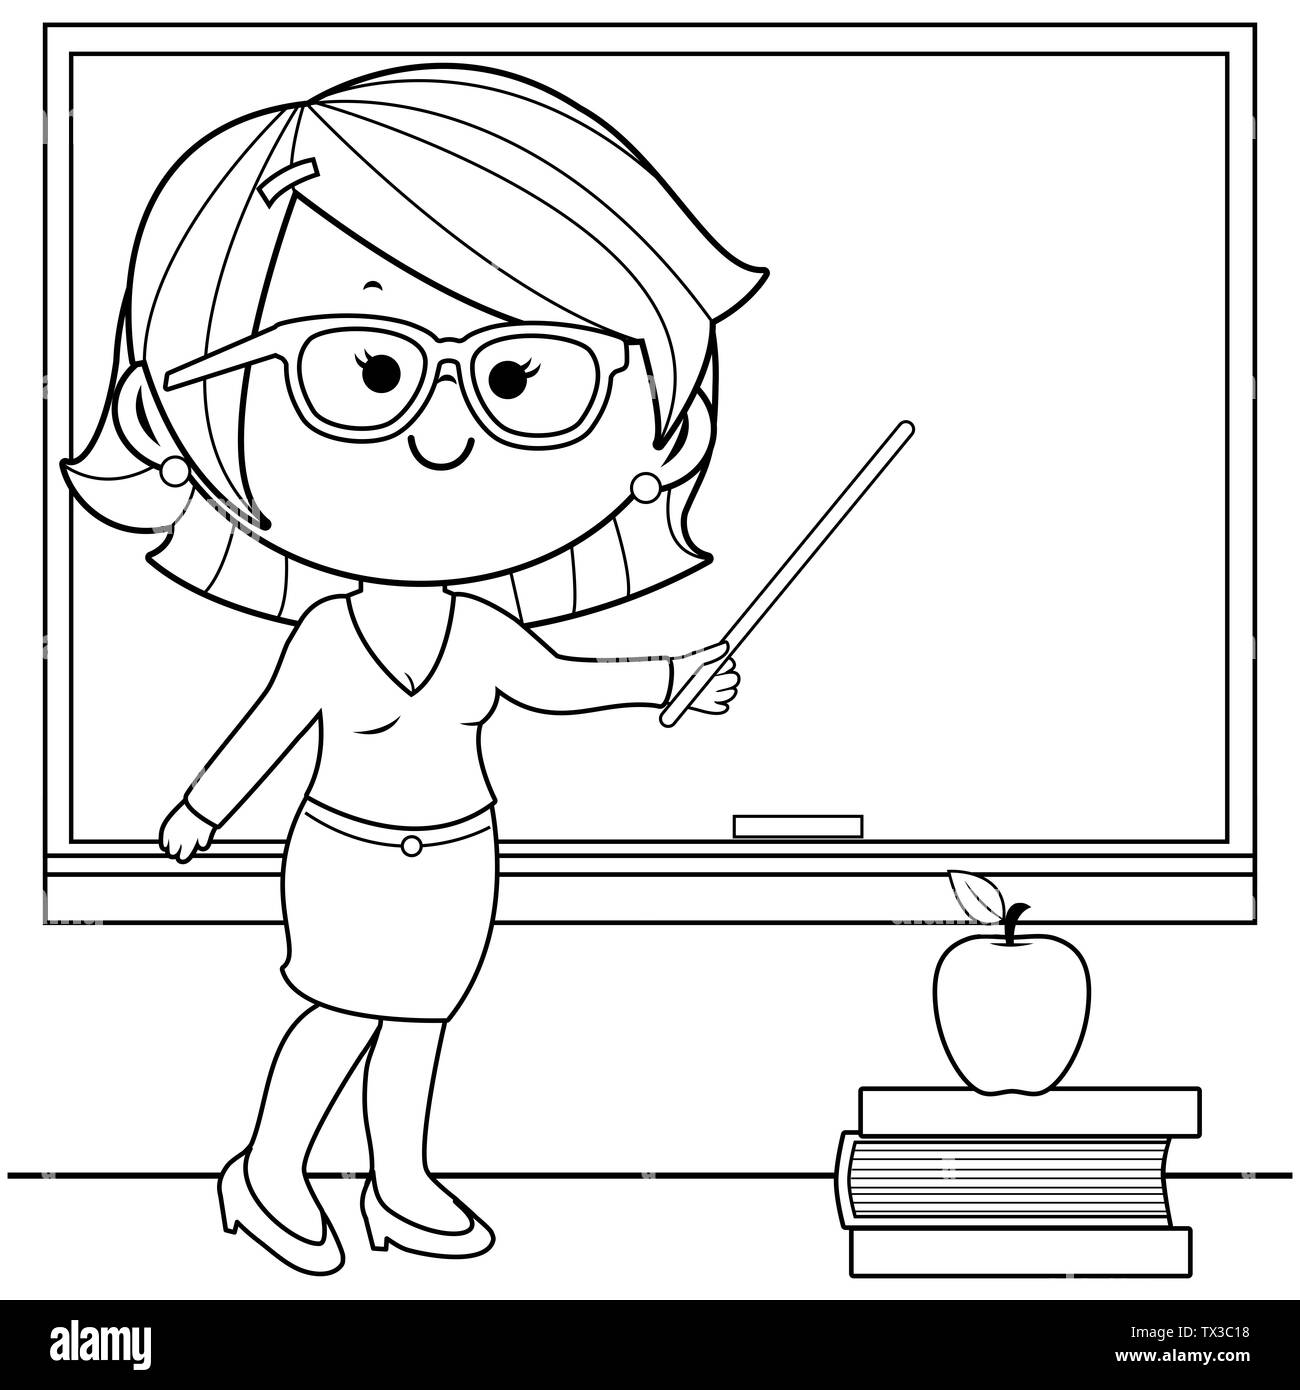 Teacher in the classroom in front of a blackboard teaching. Black and white coloring page illustration Stock Photo